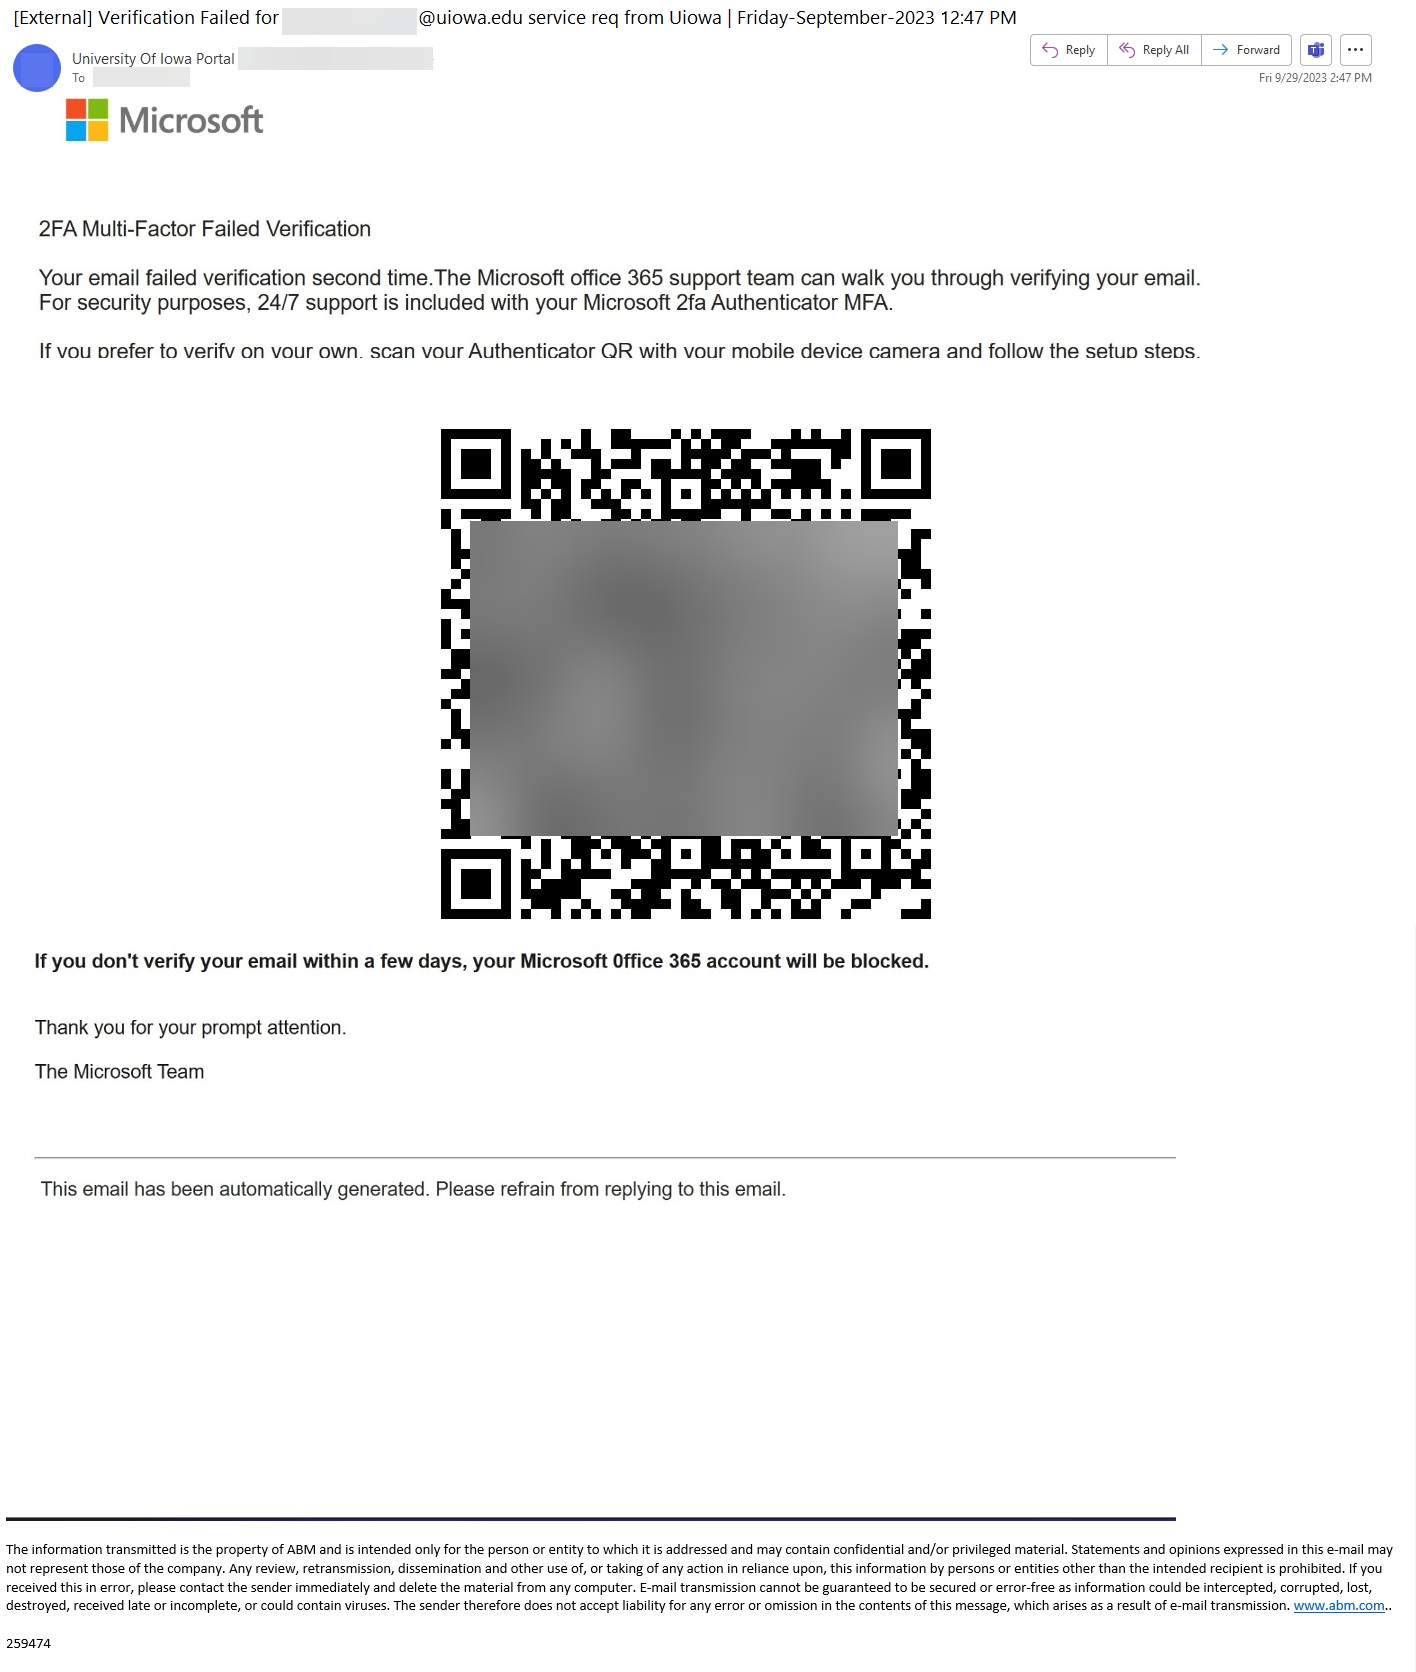 Phishing email contents